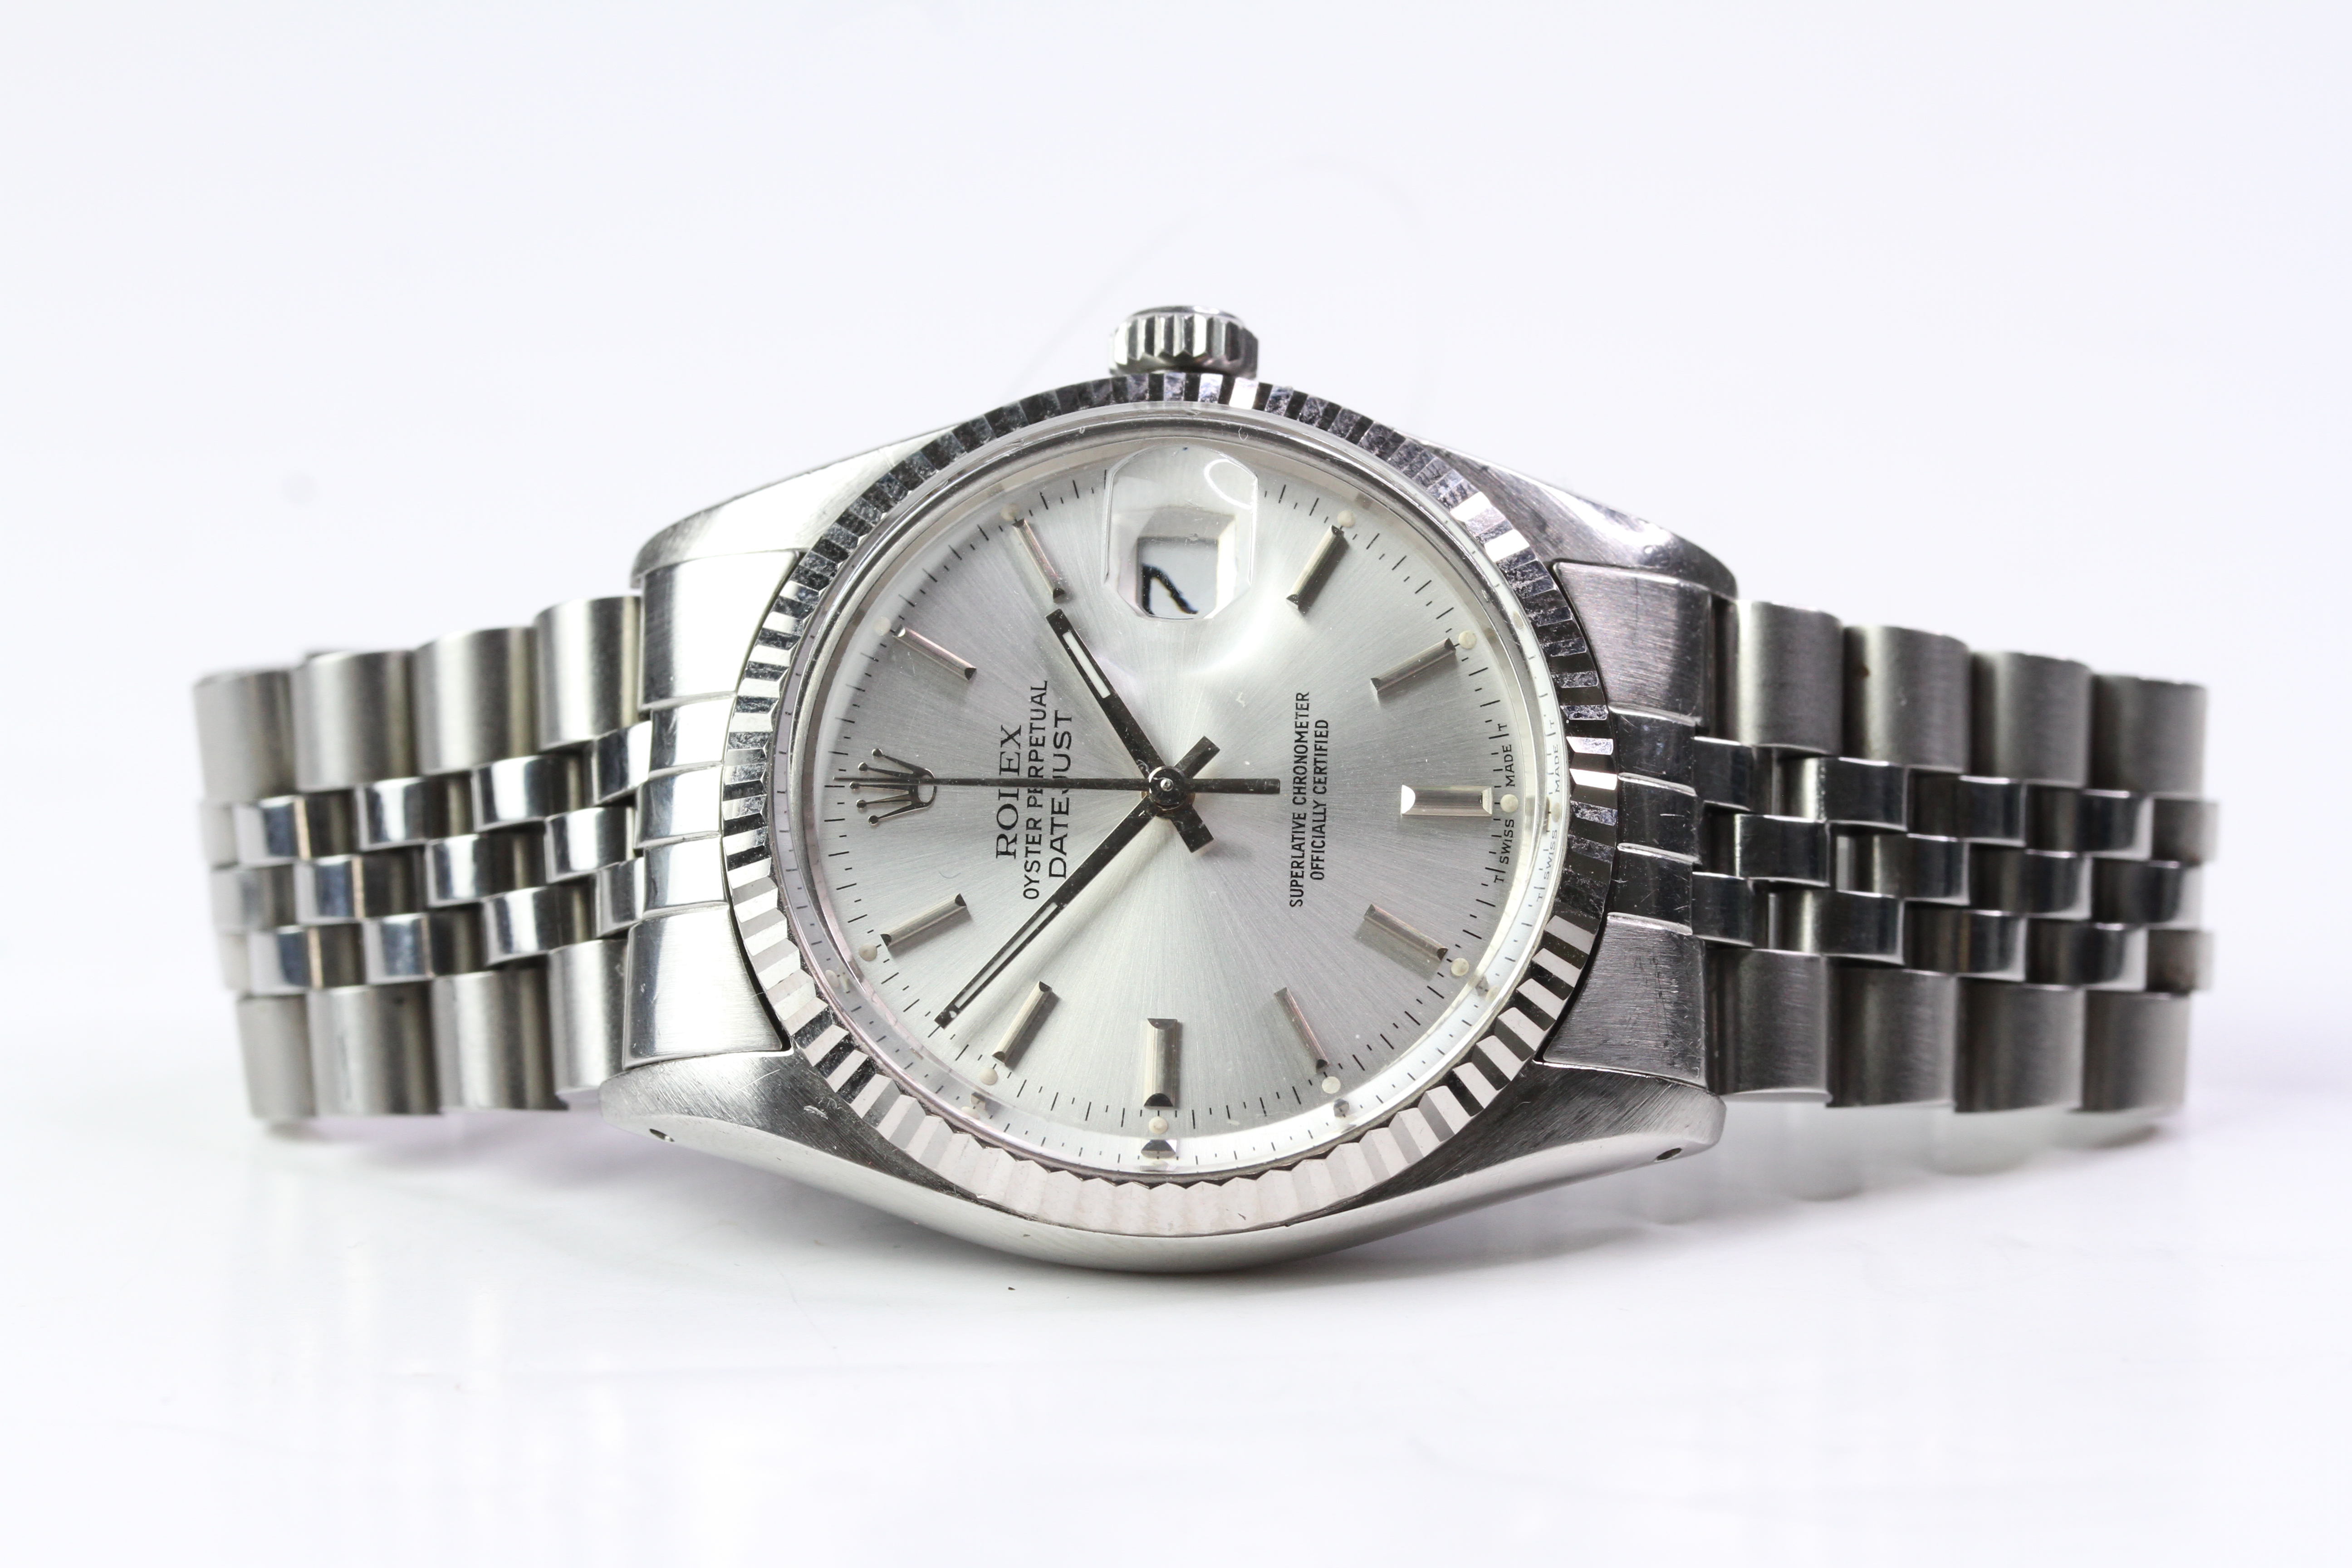 ROLEX OYSTER PERPETUAL DATEJUST REFERENCE 16014 CIRCA 1984, silver dial with baton hour markers,